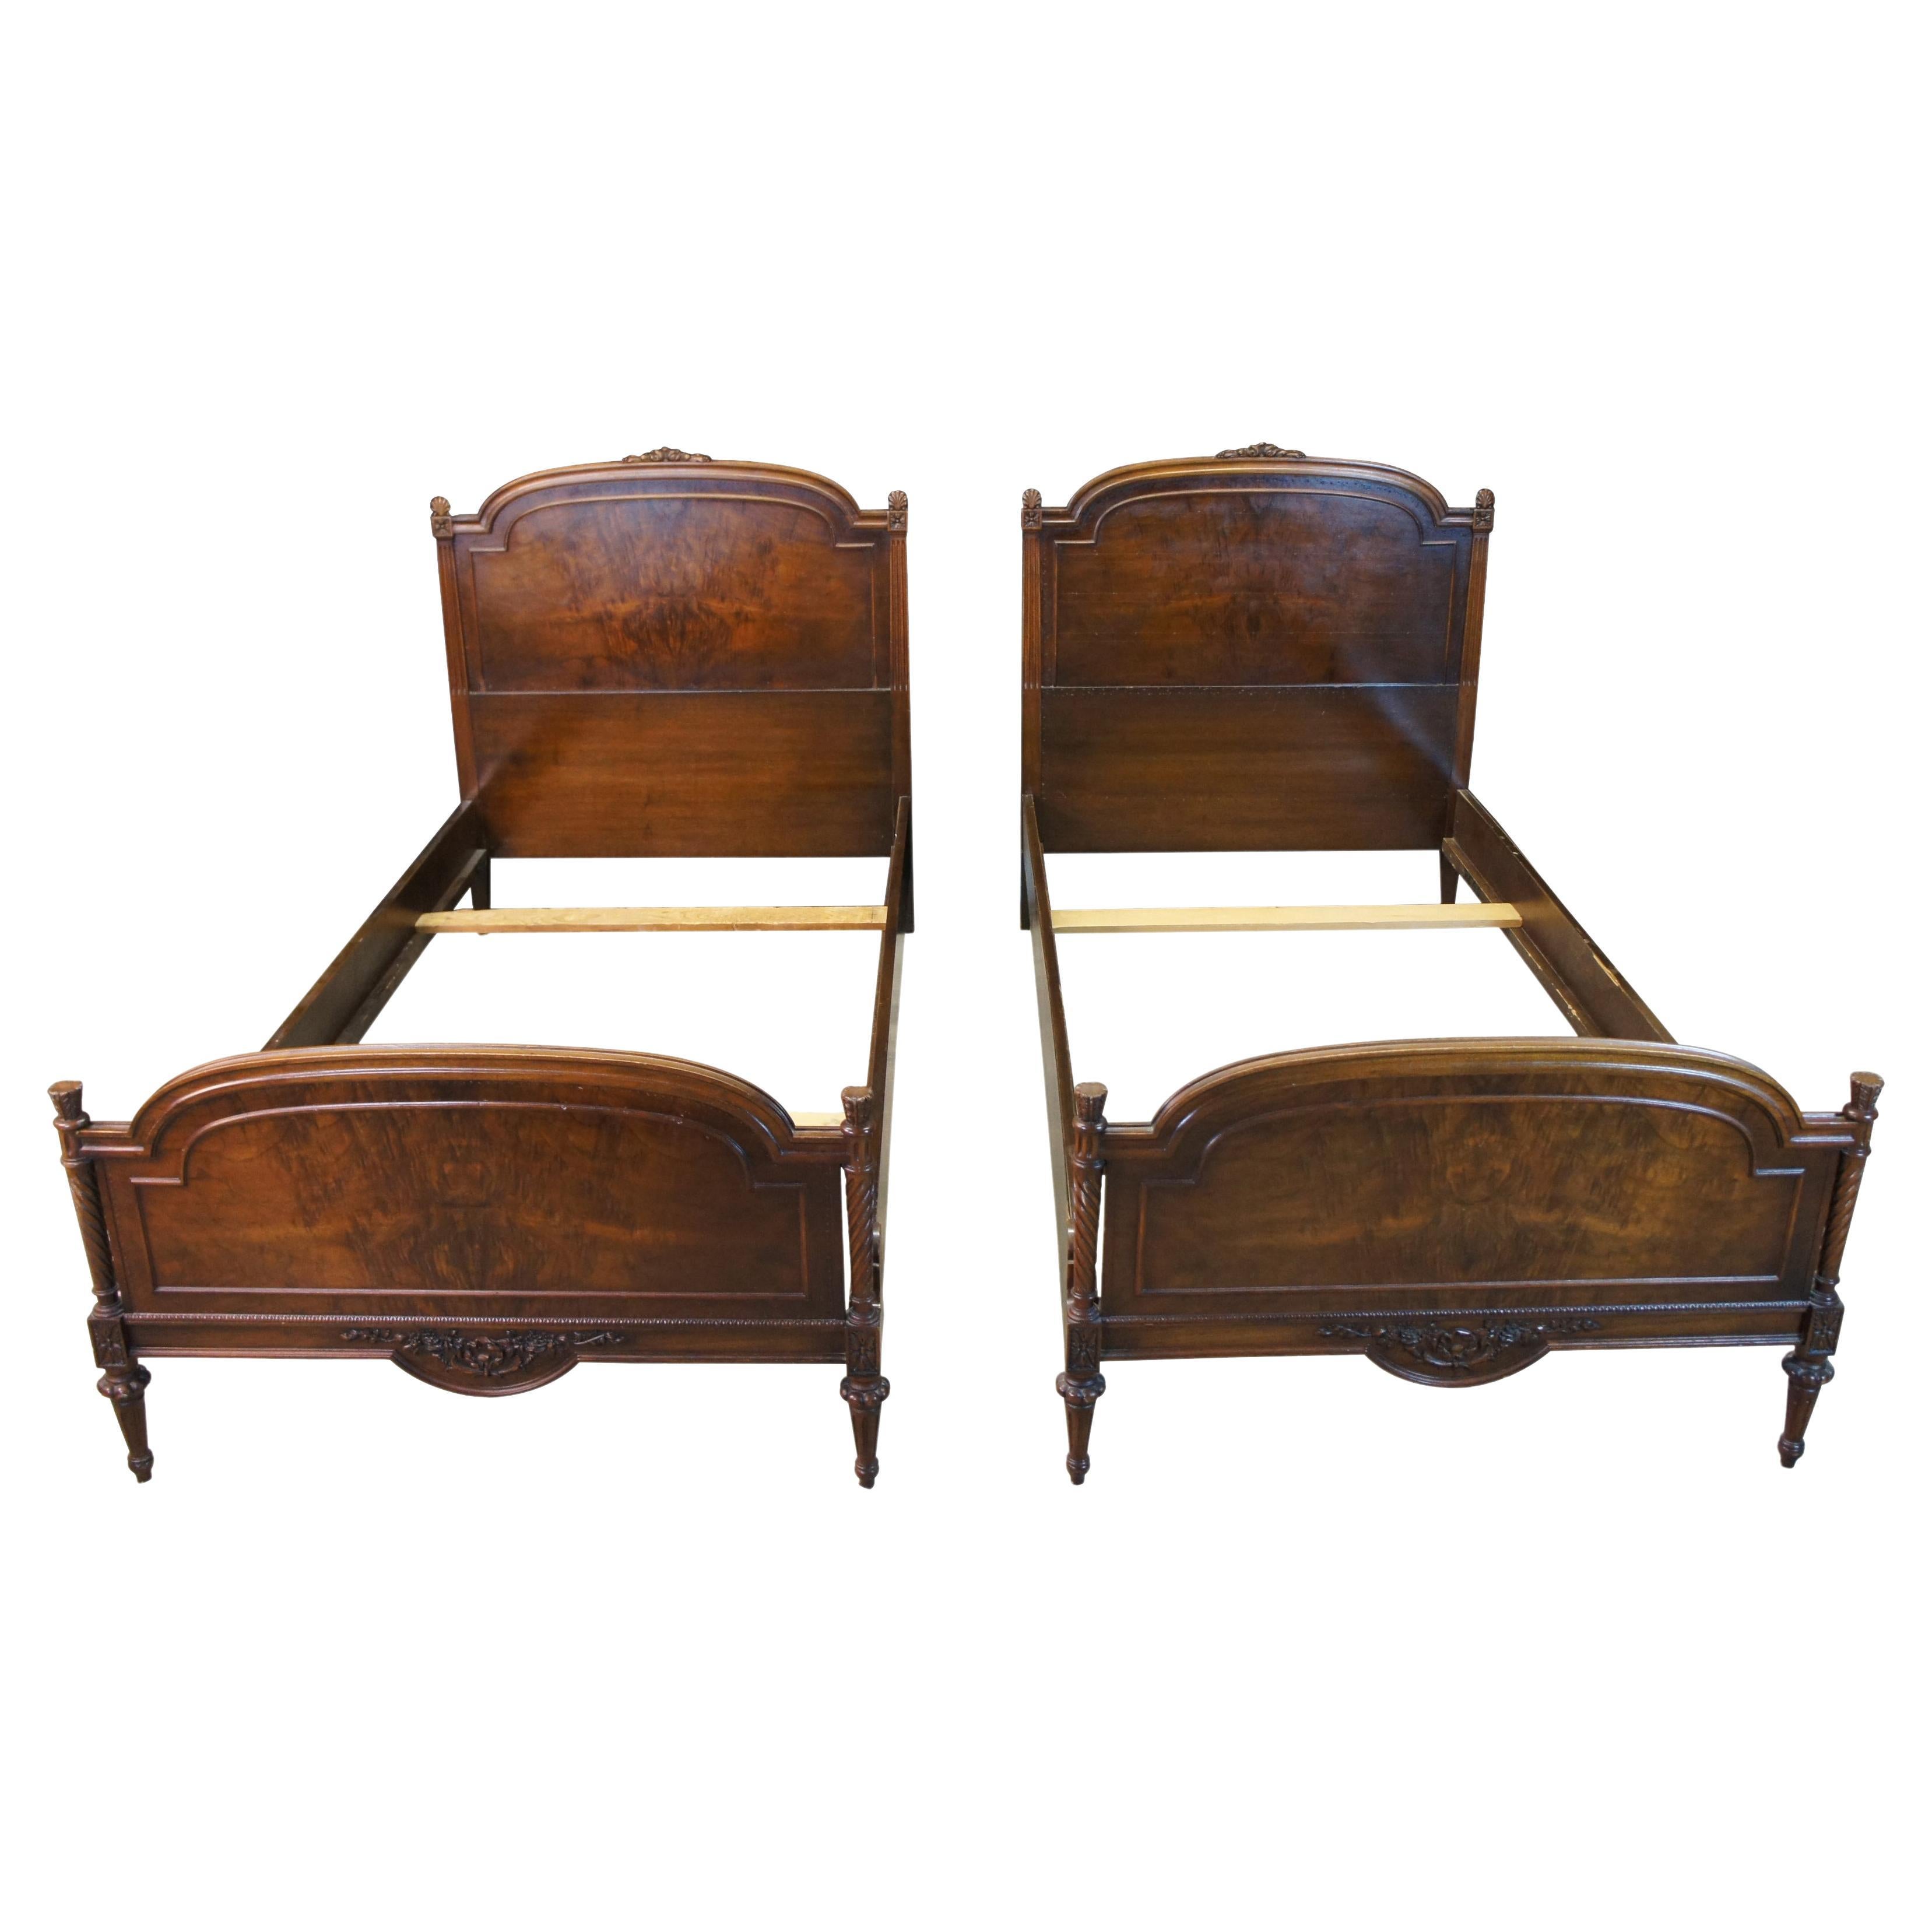 2 Antique Johnson Furniture French Neoclassical Walnut Twin Size Beds Frames